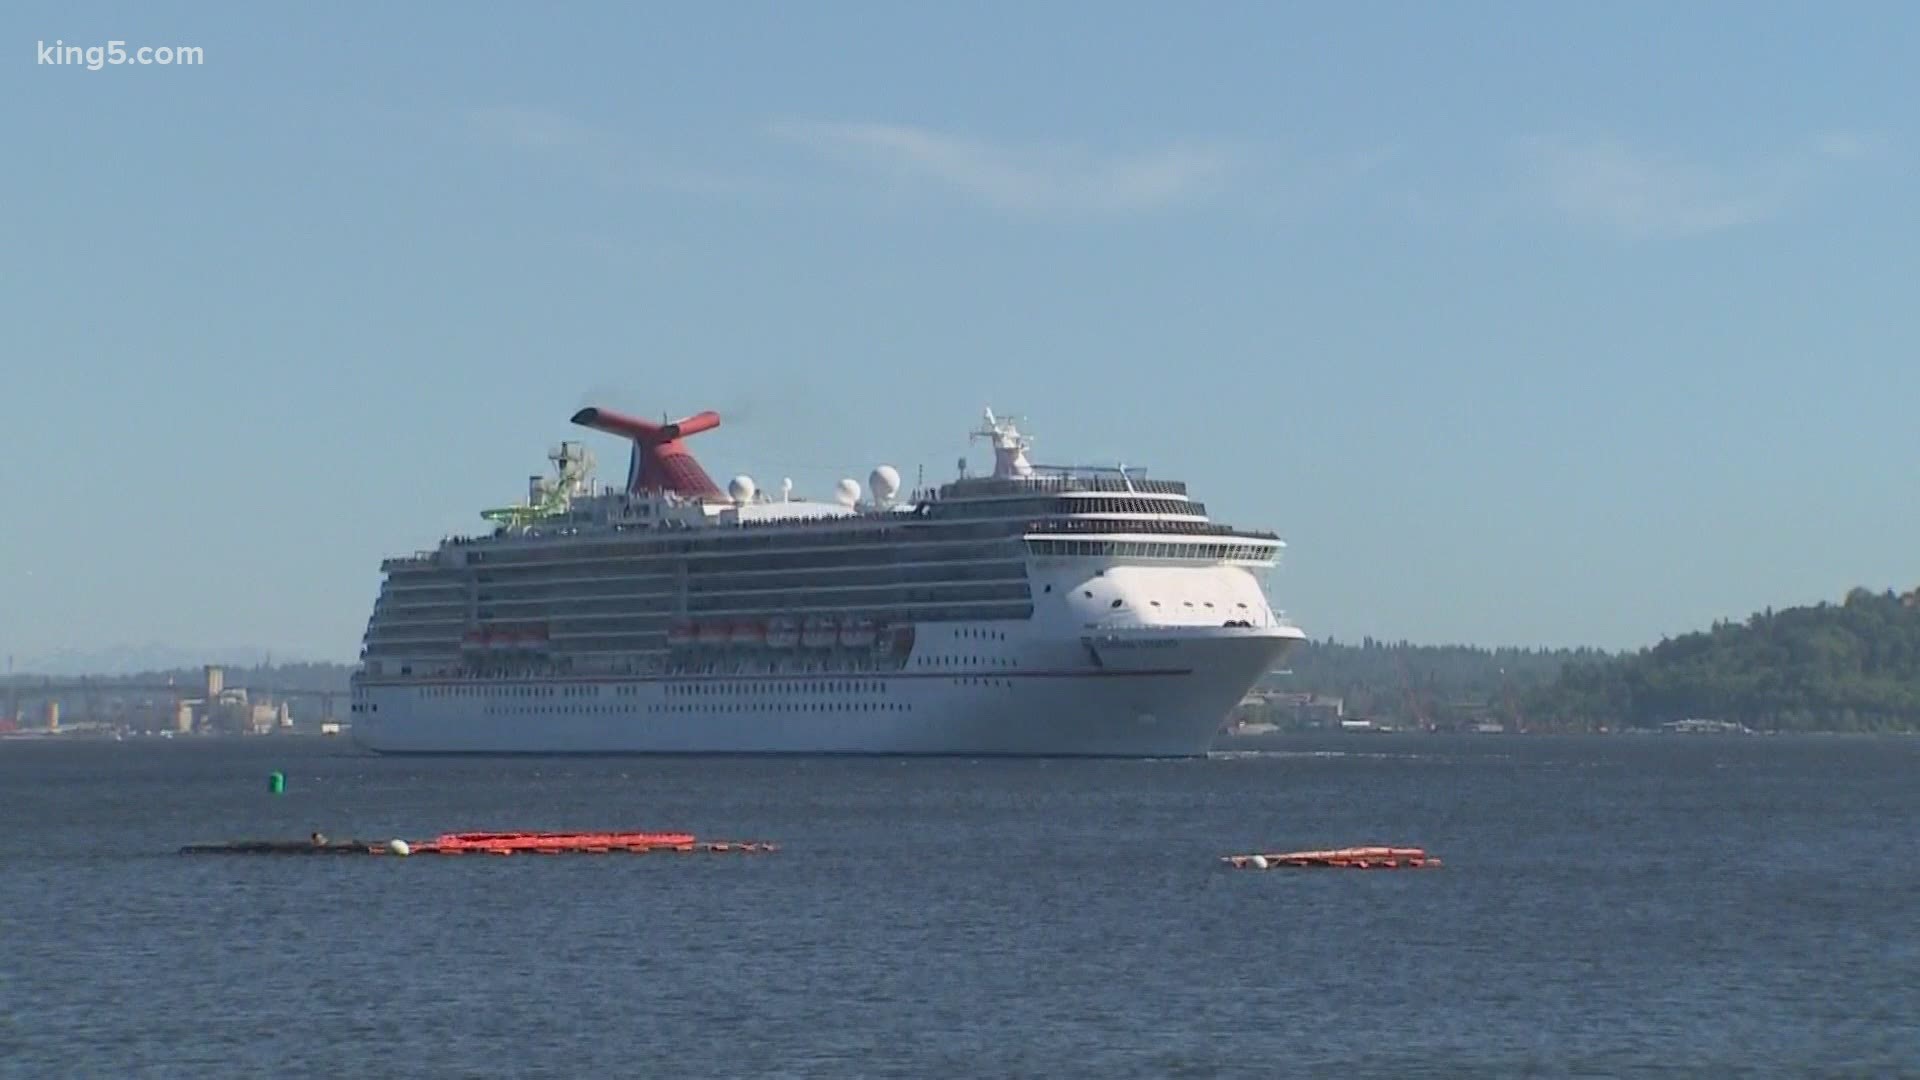 For the second year in a row, Seattle's cruise season has been canceled.